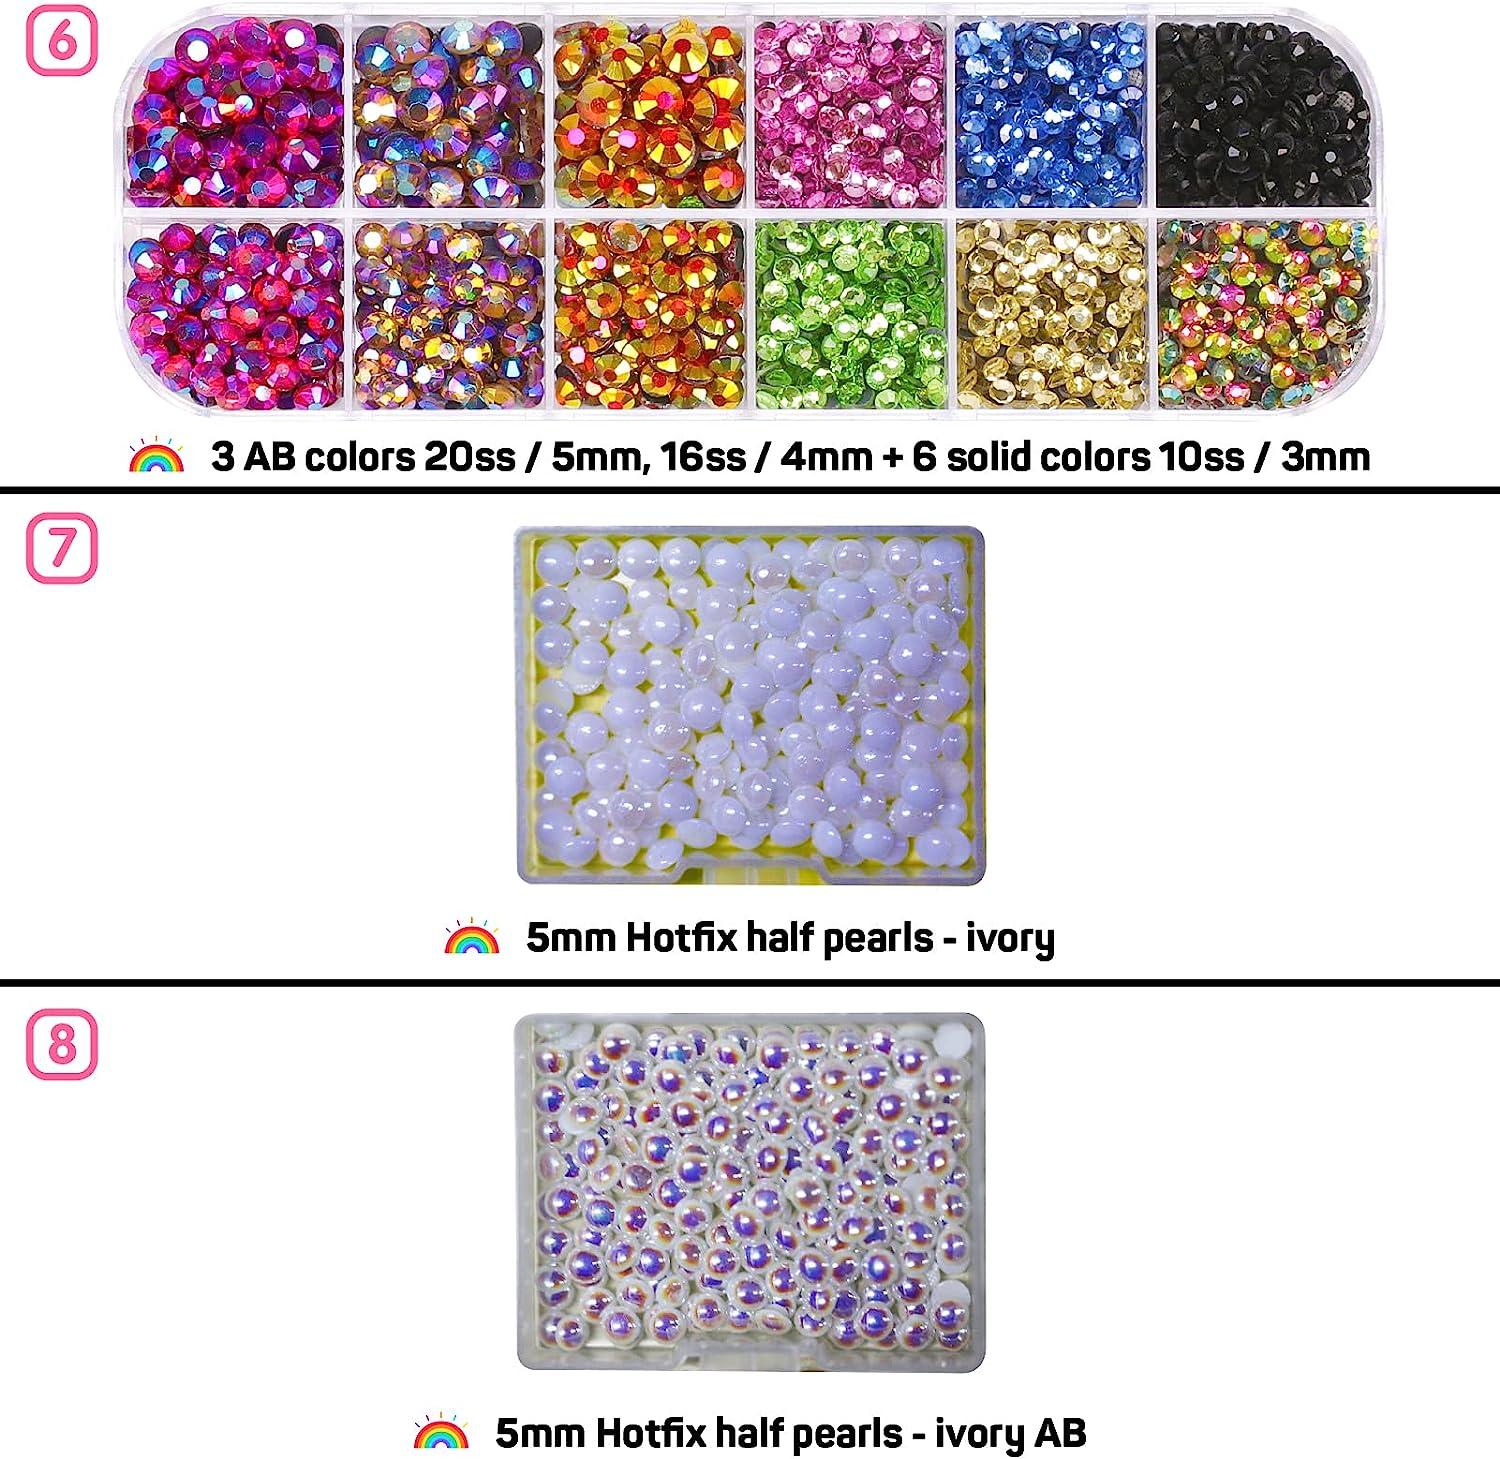 Worthofbest 5mm SS20 Hotfix Rhinestones for Fabric, Clothing, Clothes,  Cardstock, Leather and Wood - 15 Colors